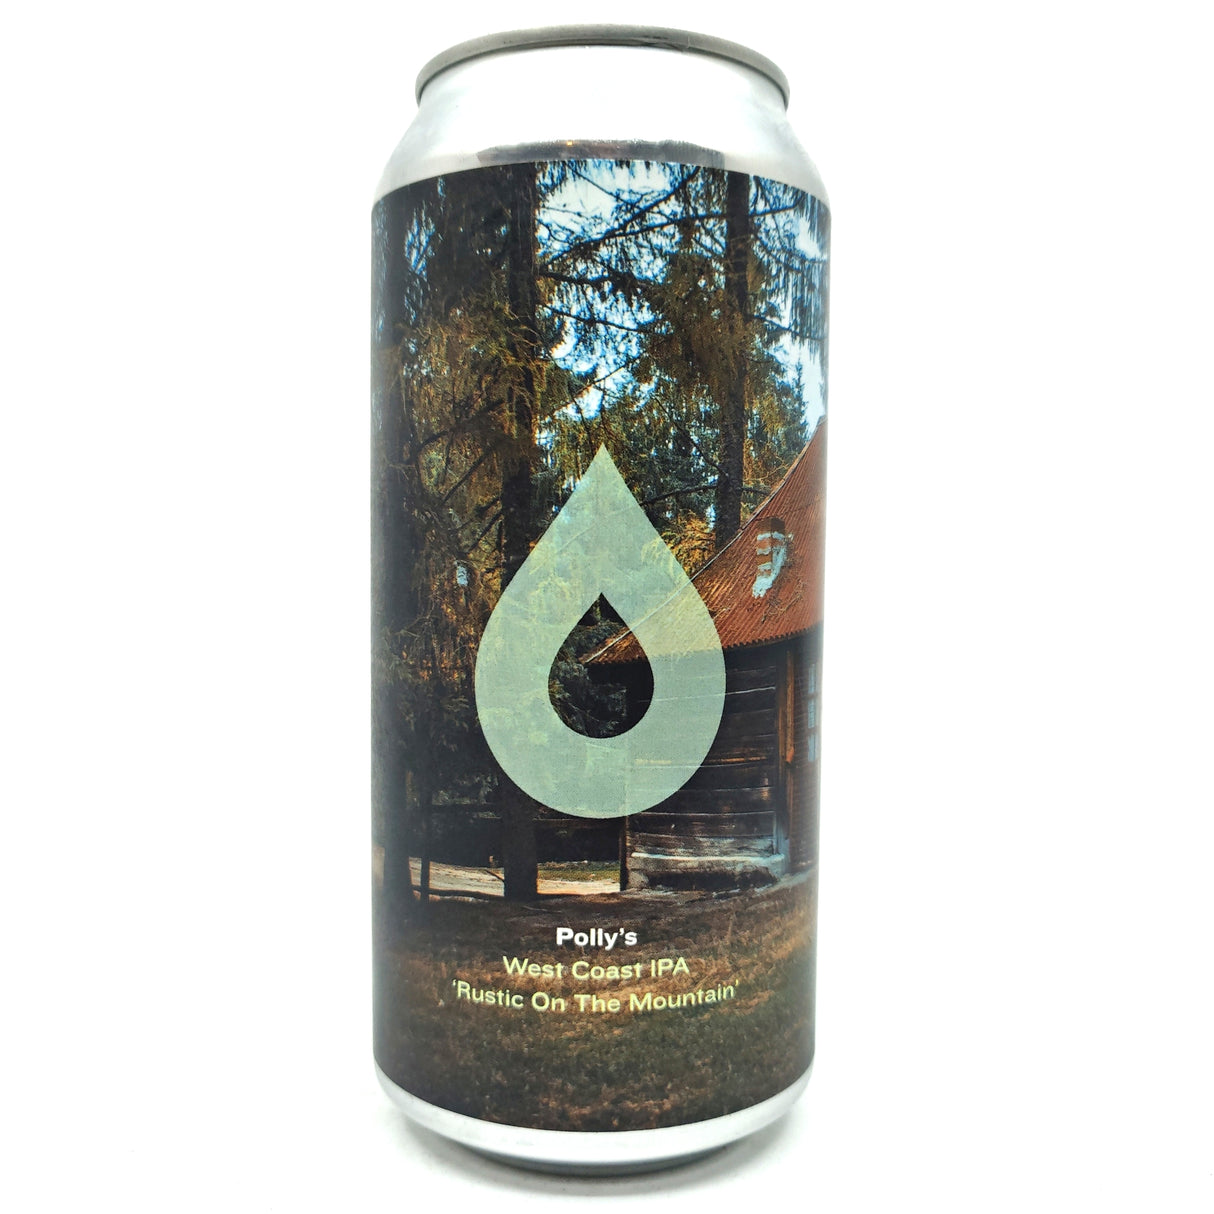 Polly's Brew Co Rustic On The Mountain IPA 6.2% (440ml can)-Hop Burns & Black